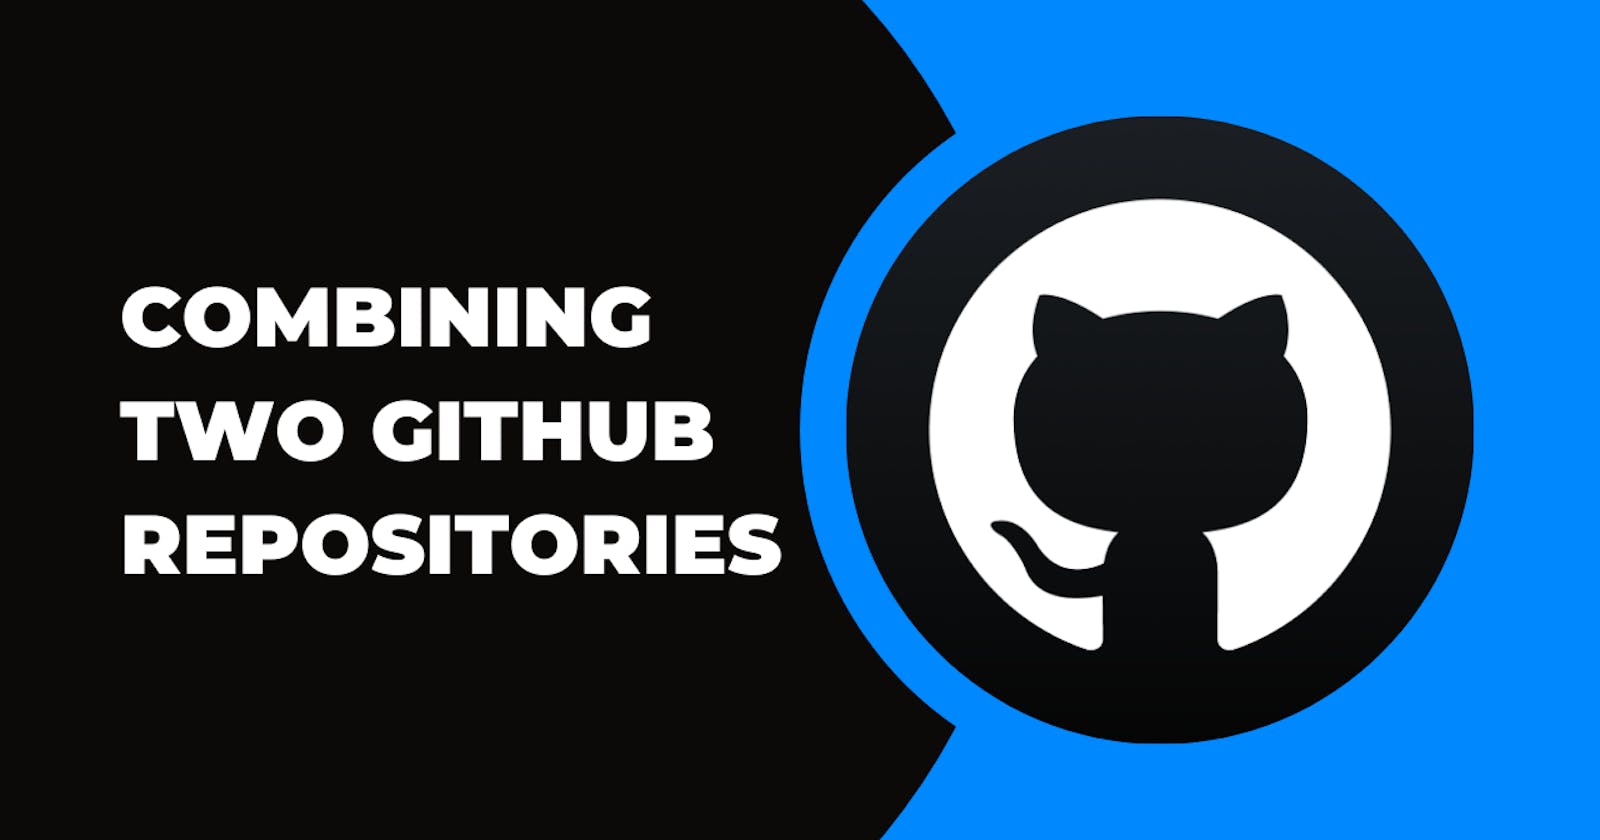 Combining Two GitHub Repositories: A Step-by-Step Guide